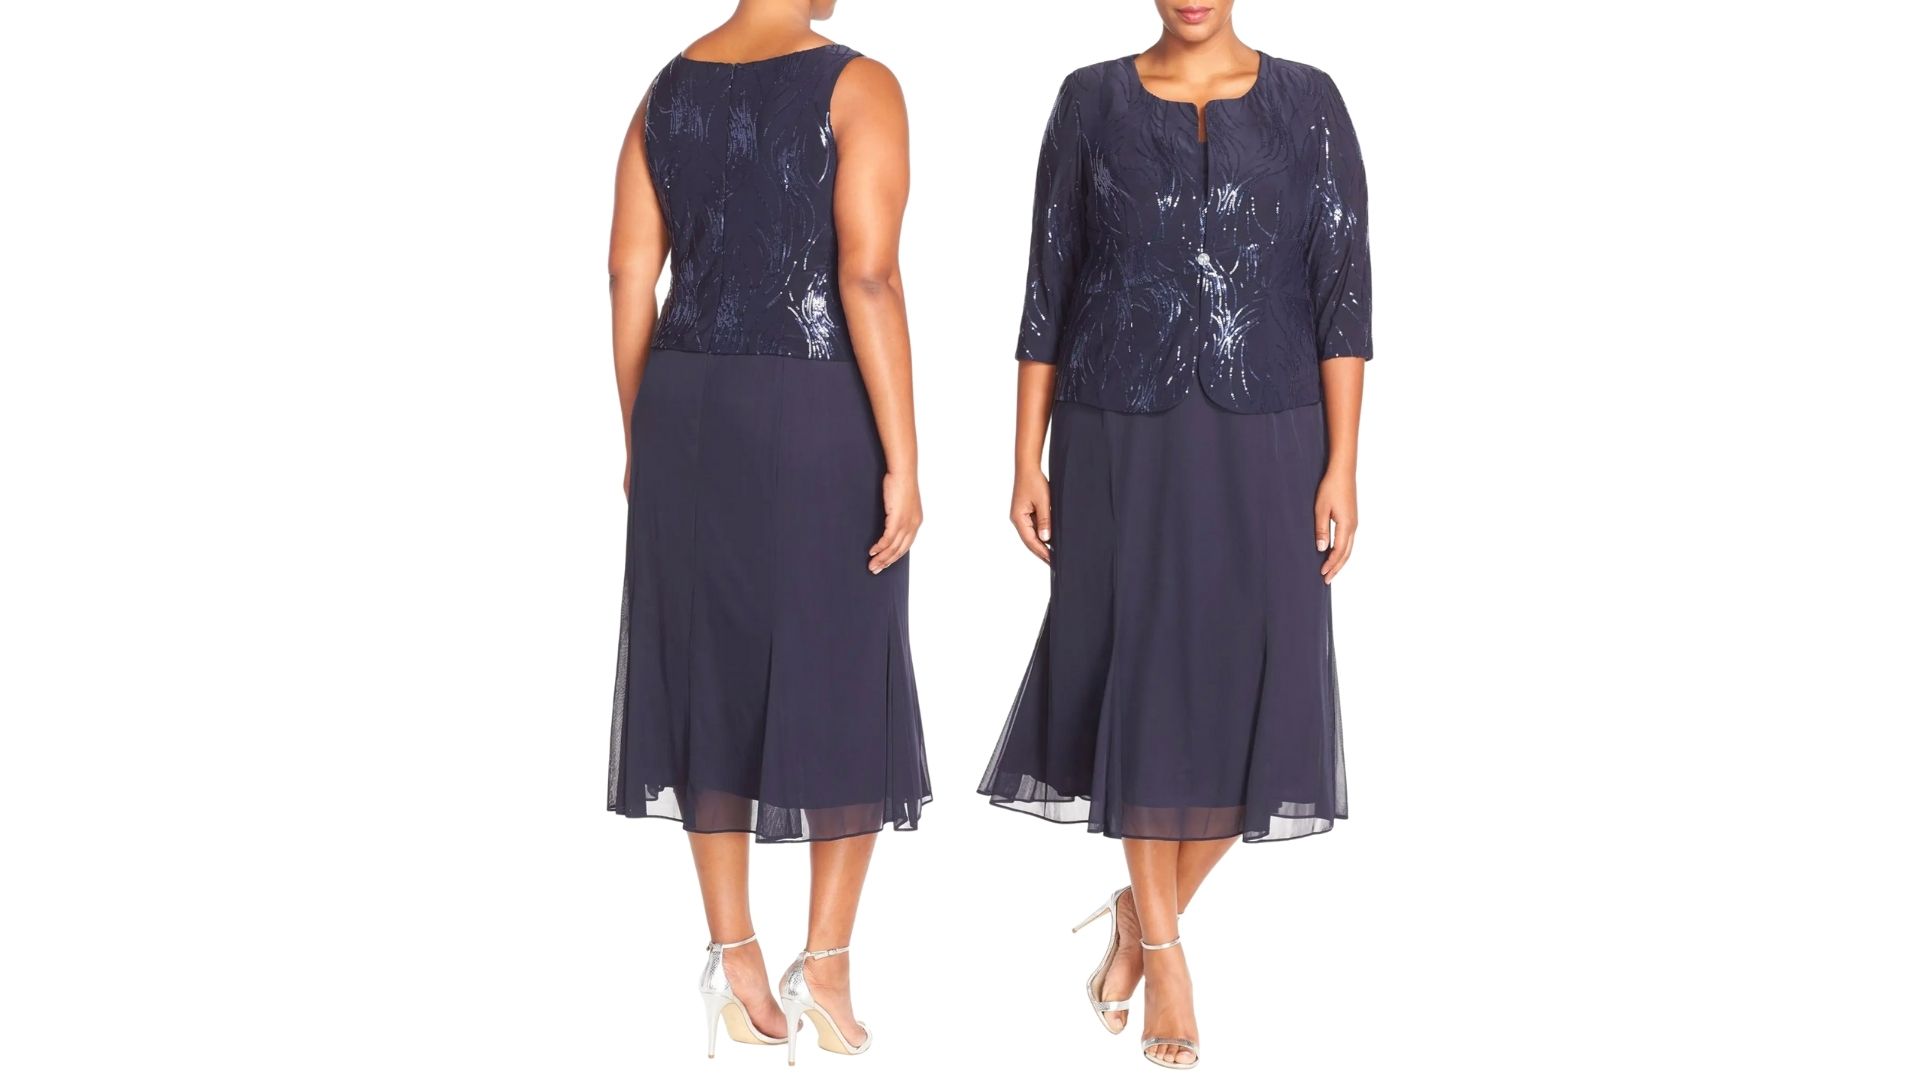 NEW BELOW KNEE MOTHER of the BRIDE PLUS SIZE DRESSES BIRTHDAY CHURCH UNDER $100 